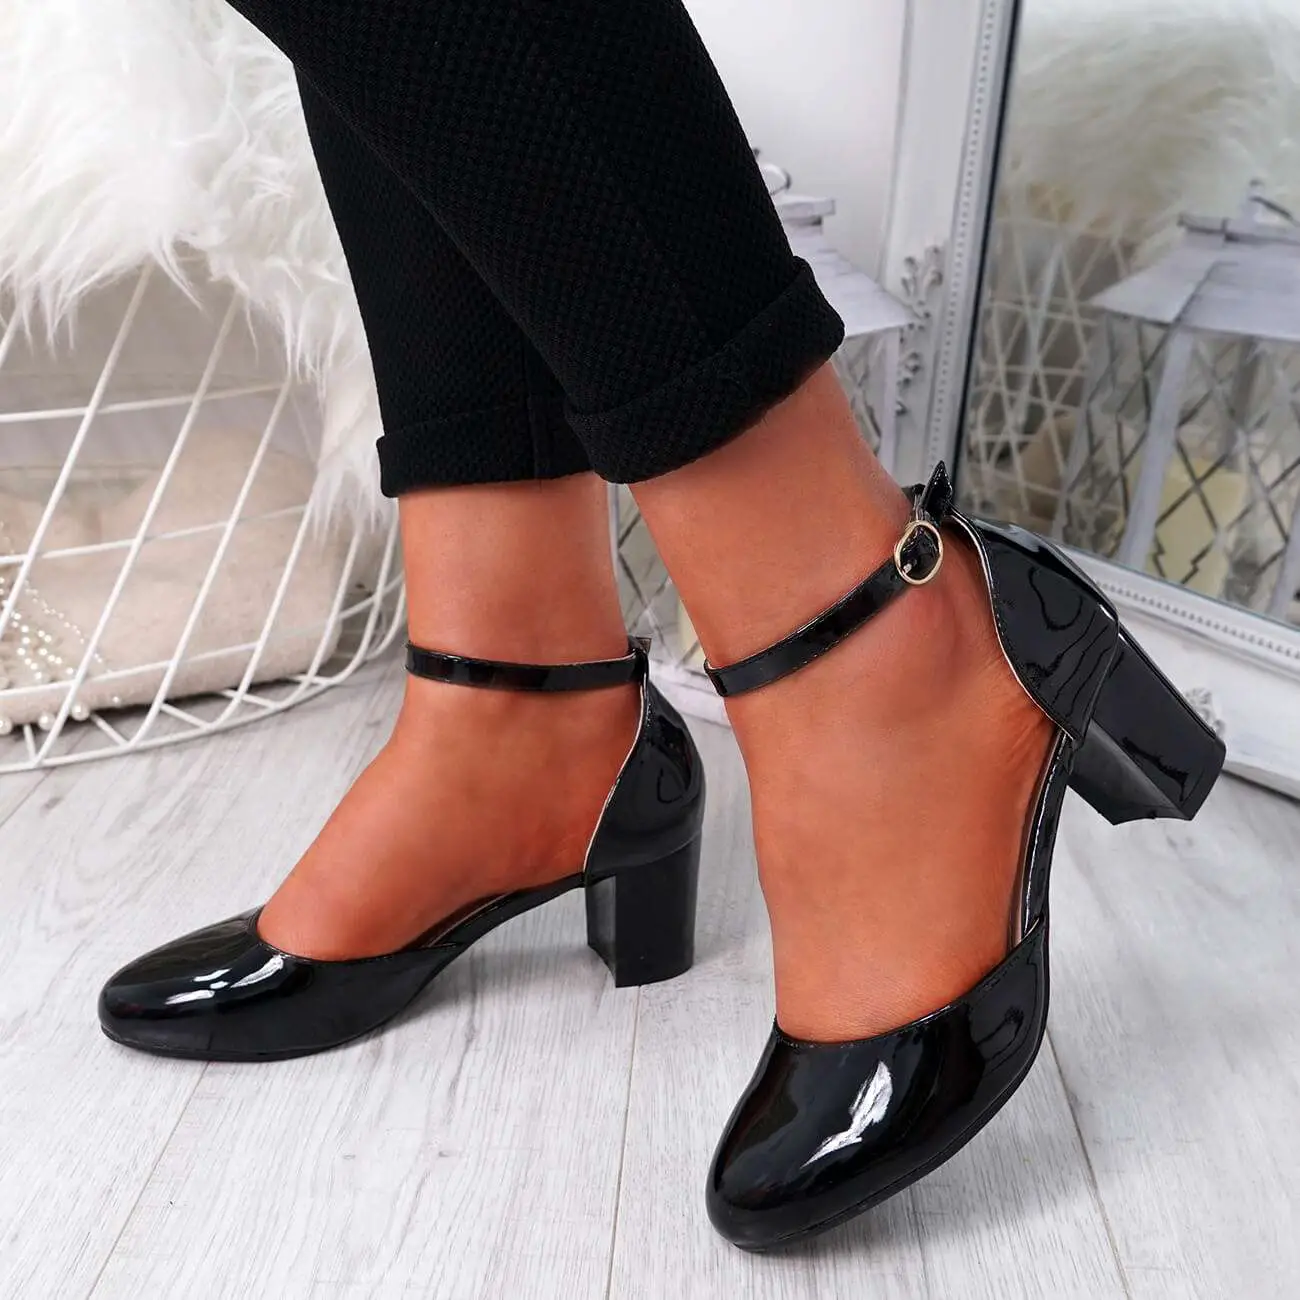 WOMENS LADIES ANKLE STRAP MID BLOCK HEEL PUMPS PATENT COMFY WORK SHOES ...